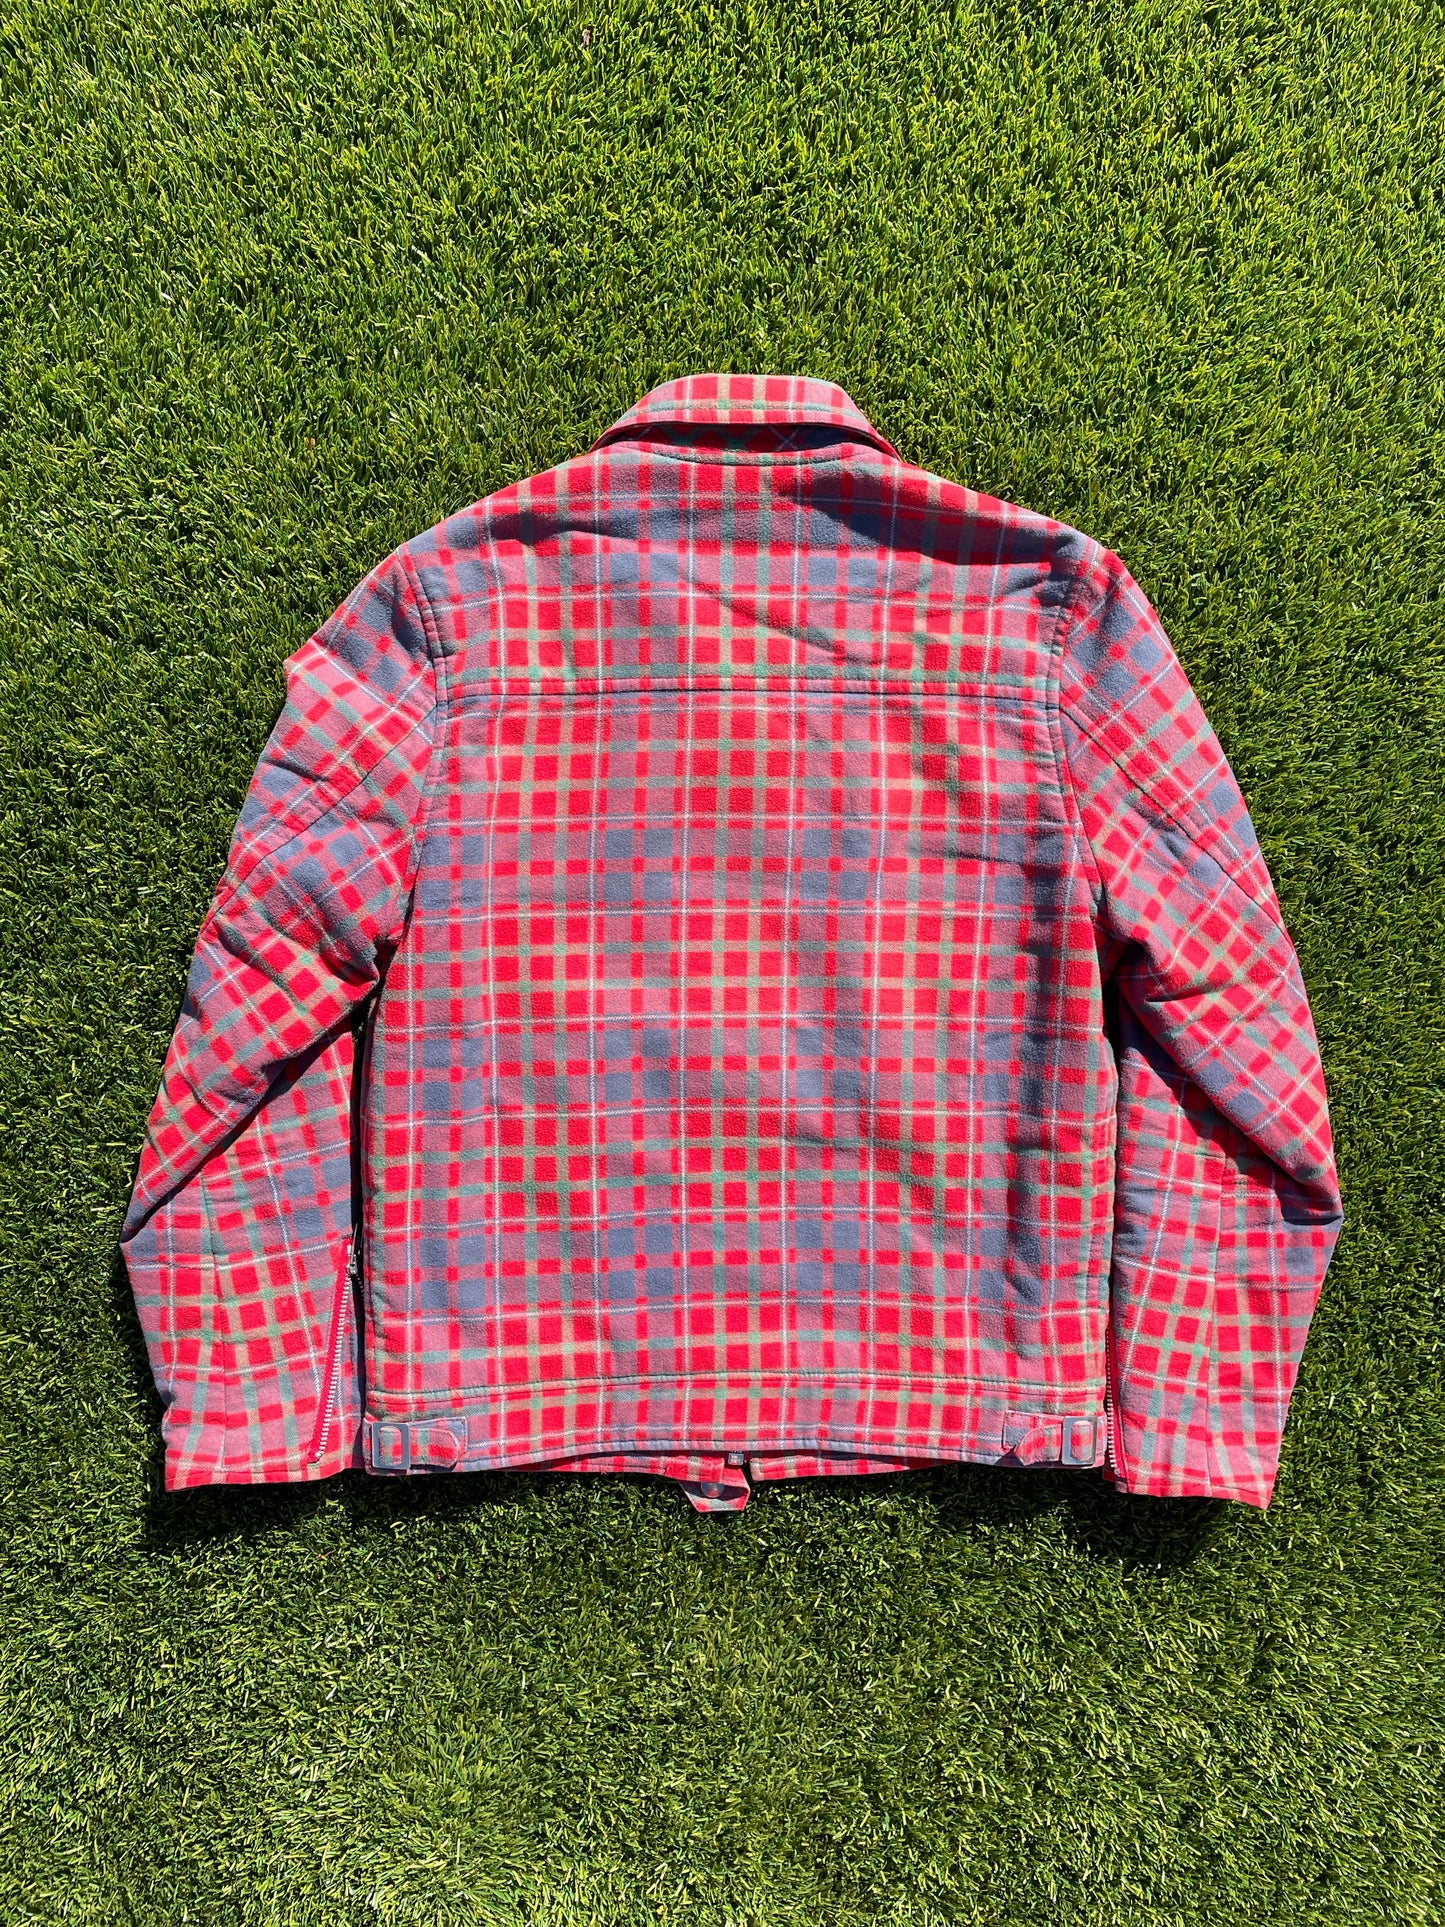 AW02 Witch Cell Division - Undercover Tartan Zip Up Jacket